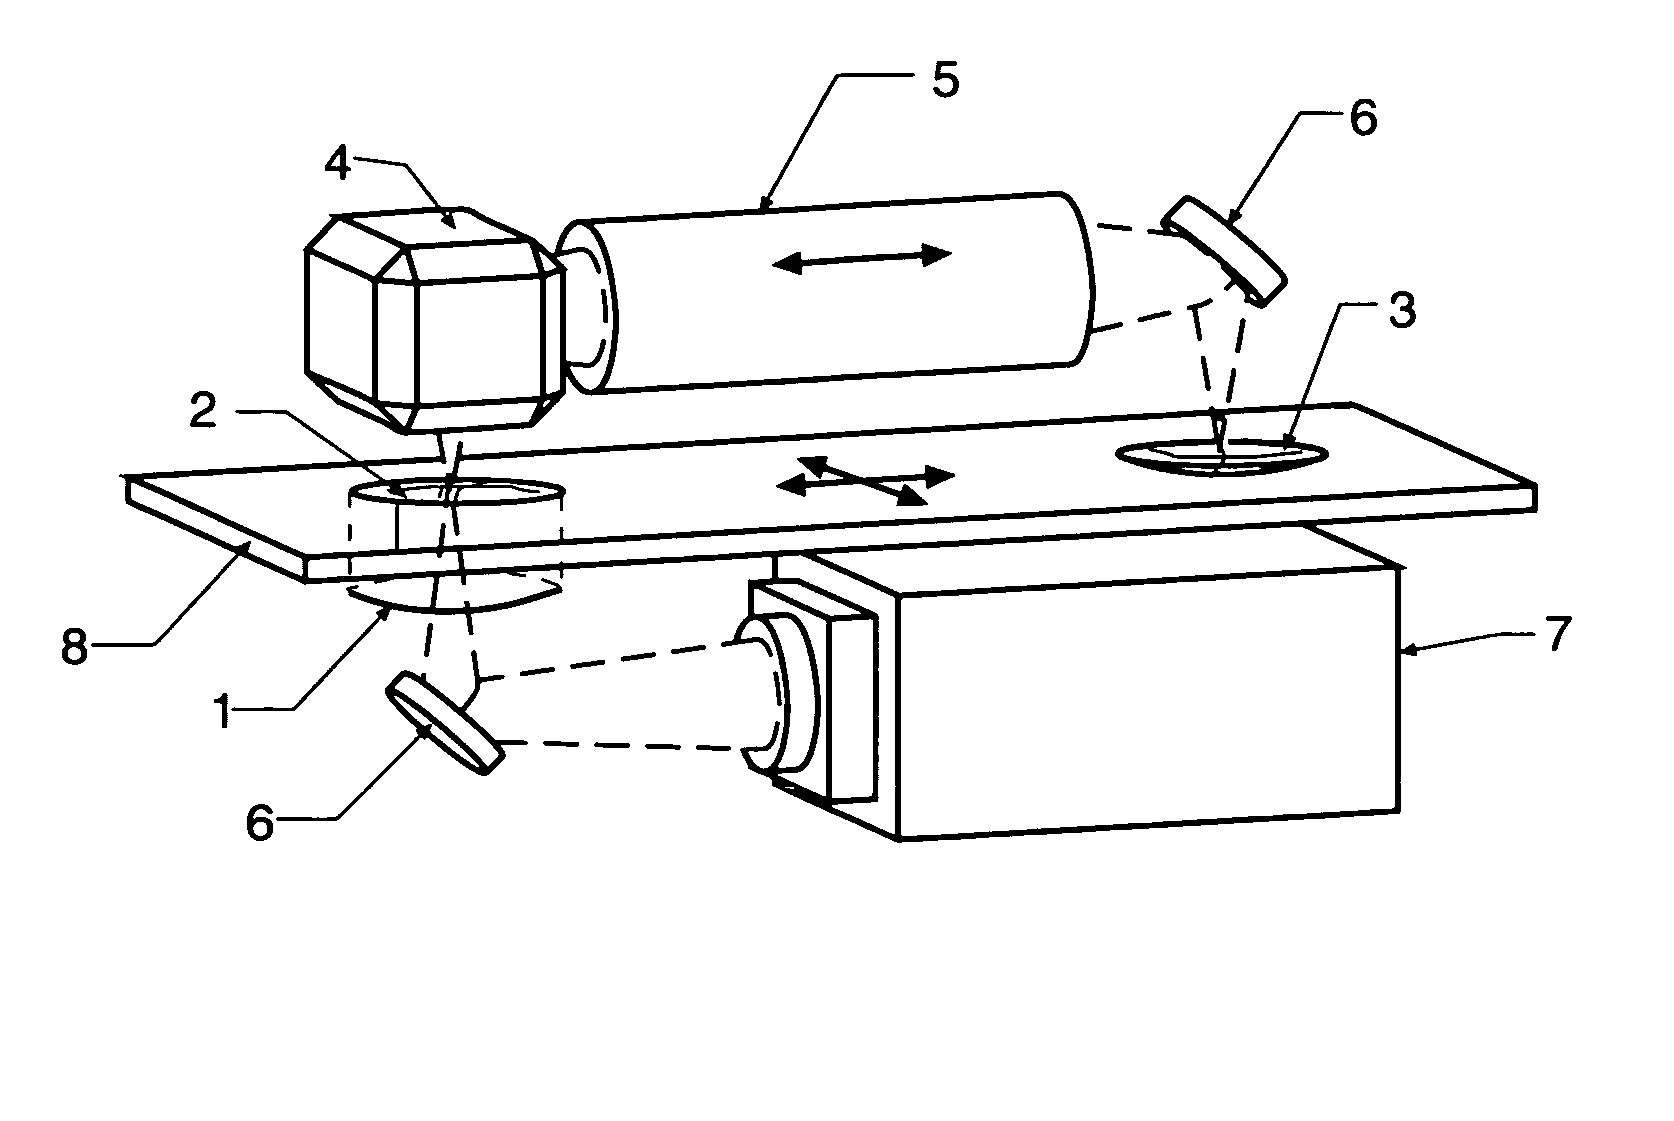 Illumination compensator for curved surface lithography